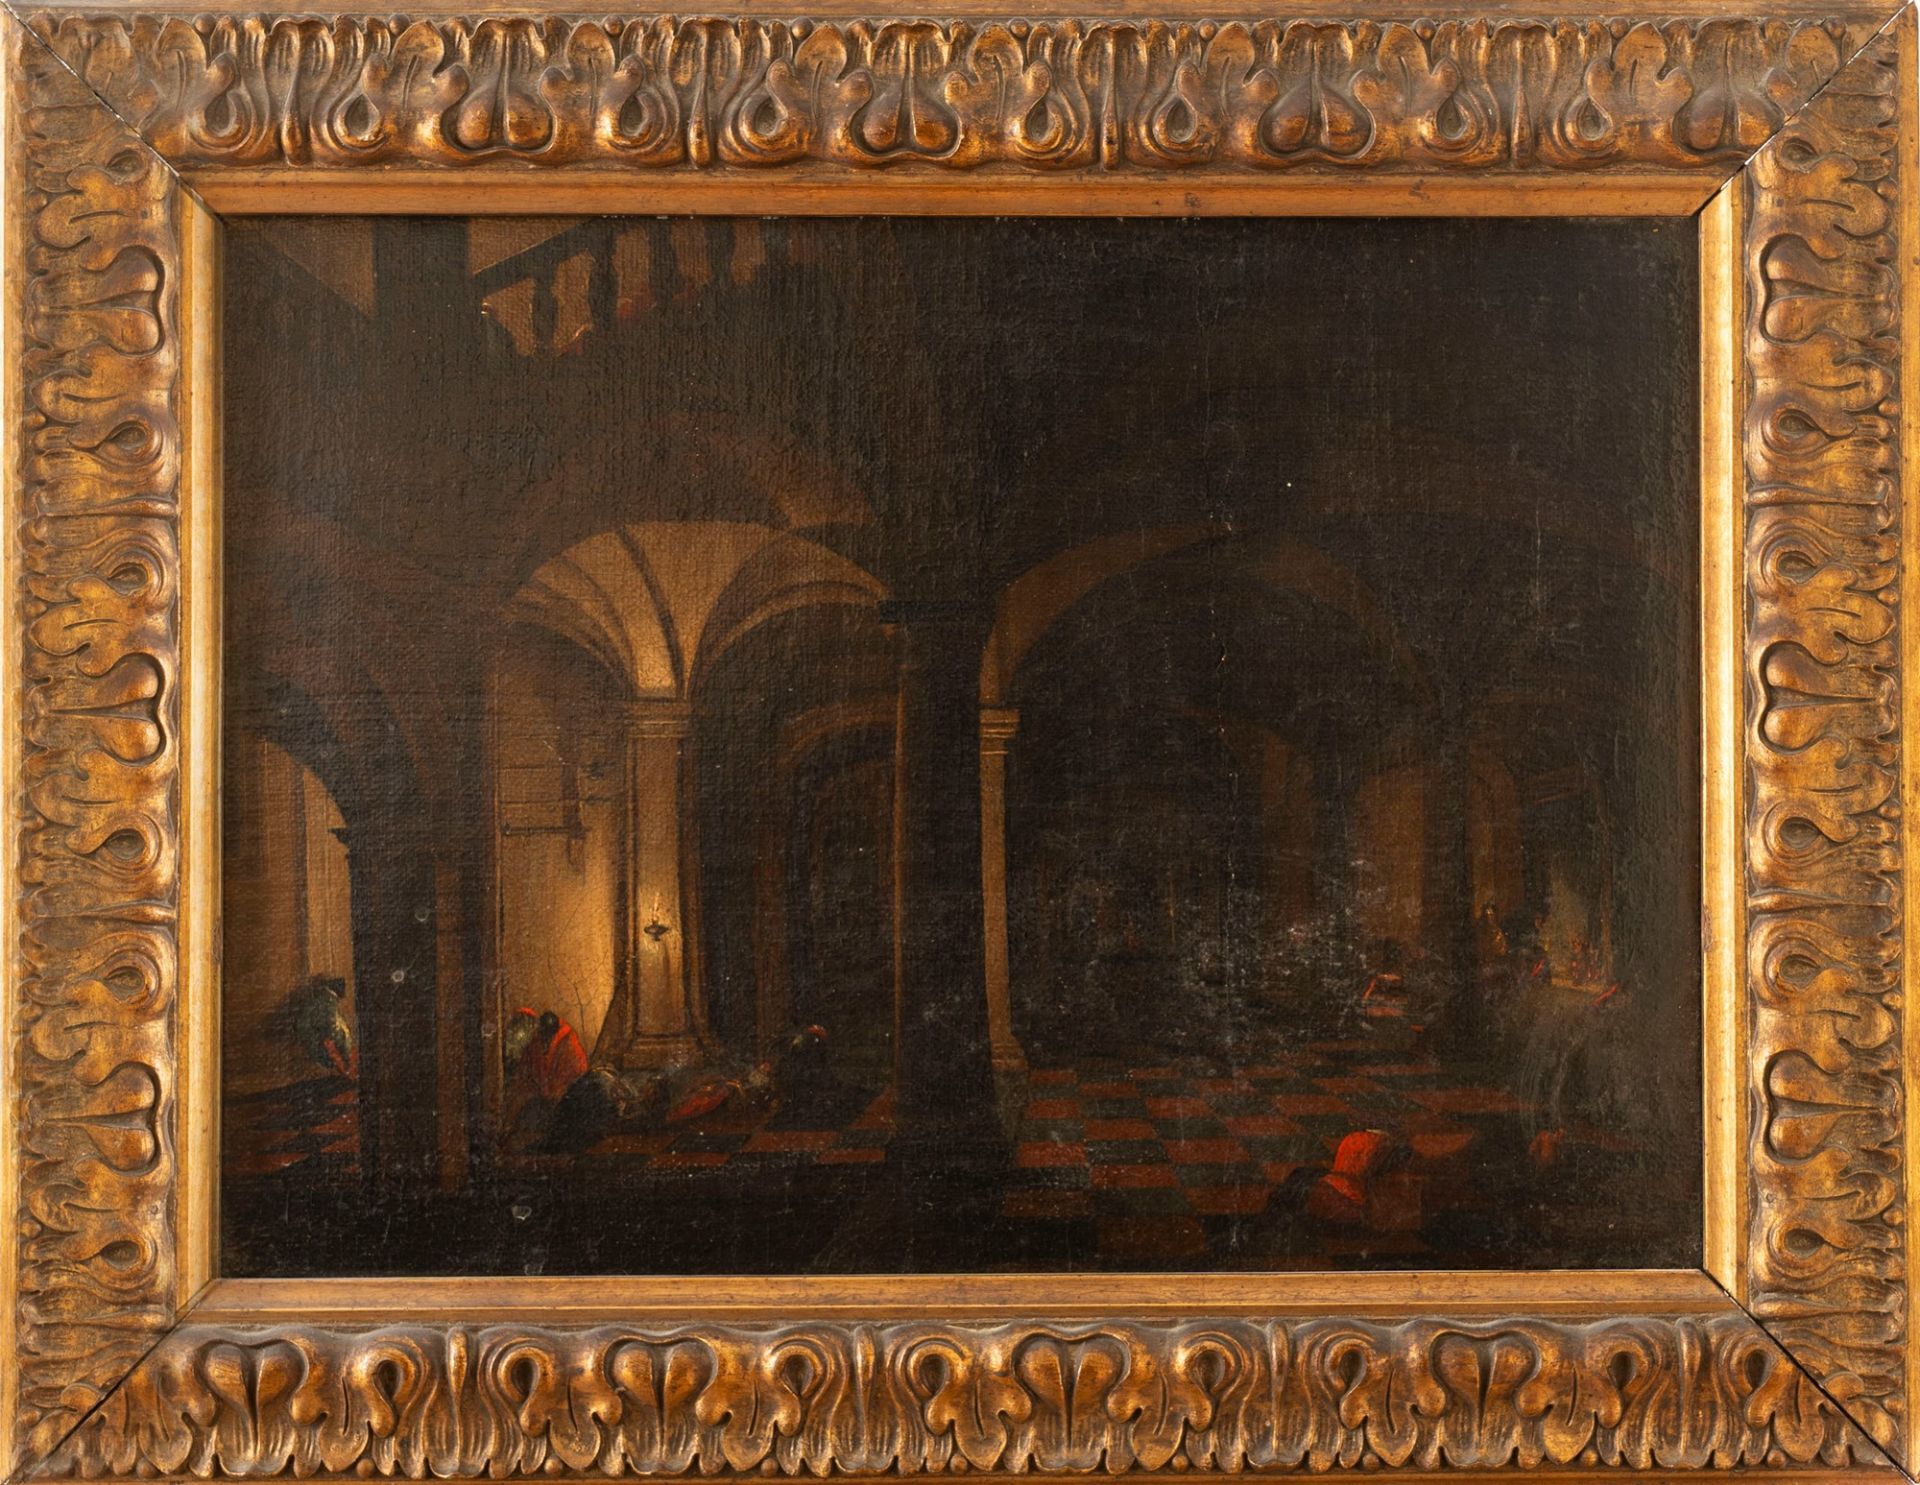 Flemish School, XVII century - Interior scene by candlelight with figures - Image 2 of 3